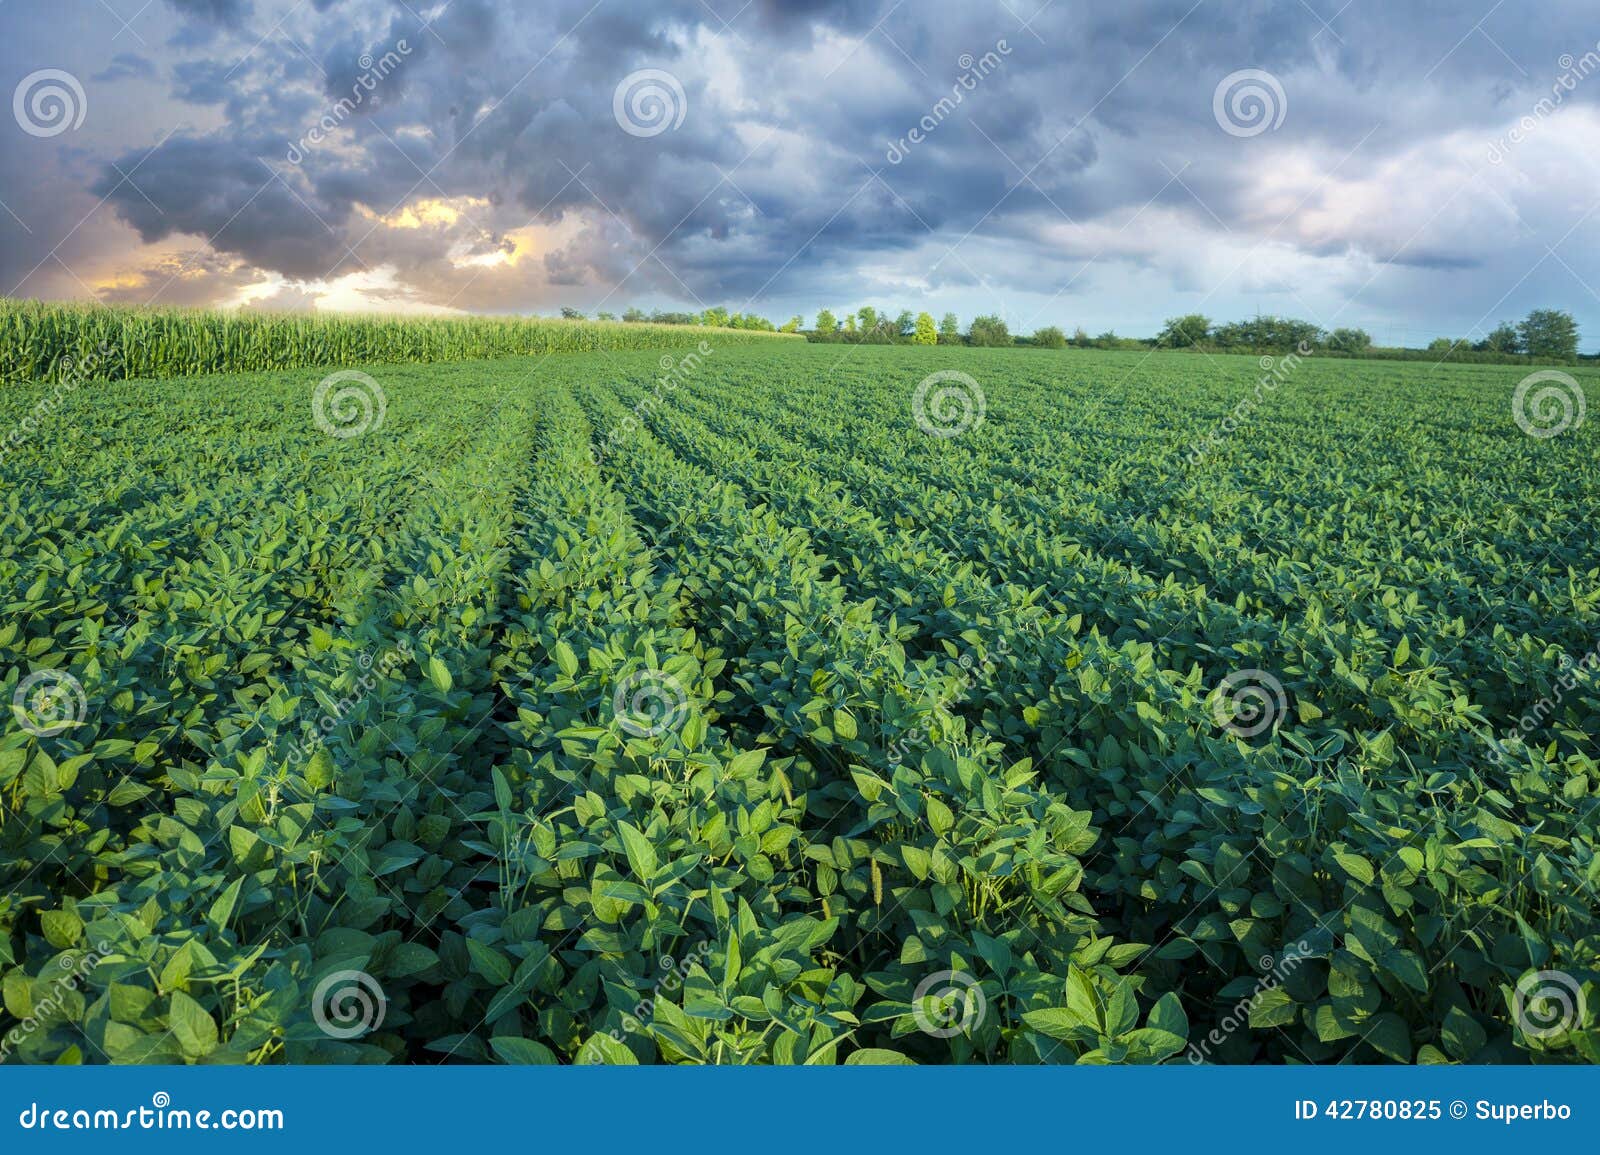 soy field with rows of soya bean plants